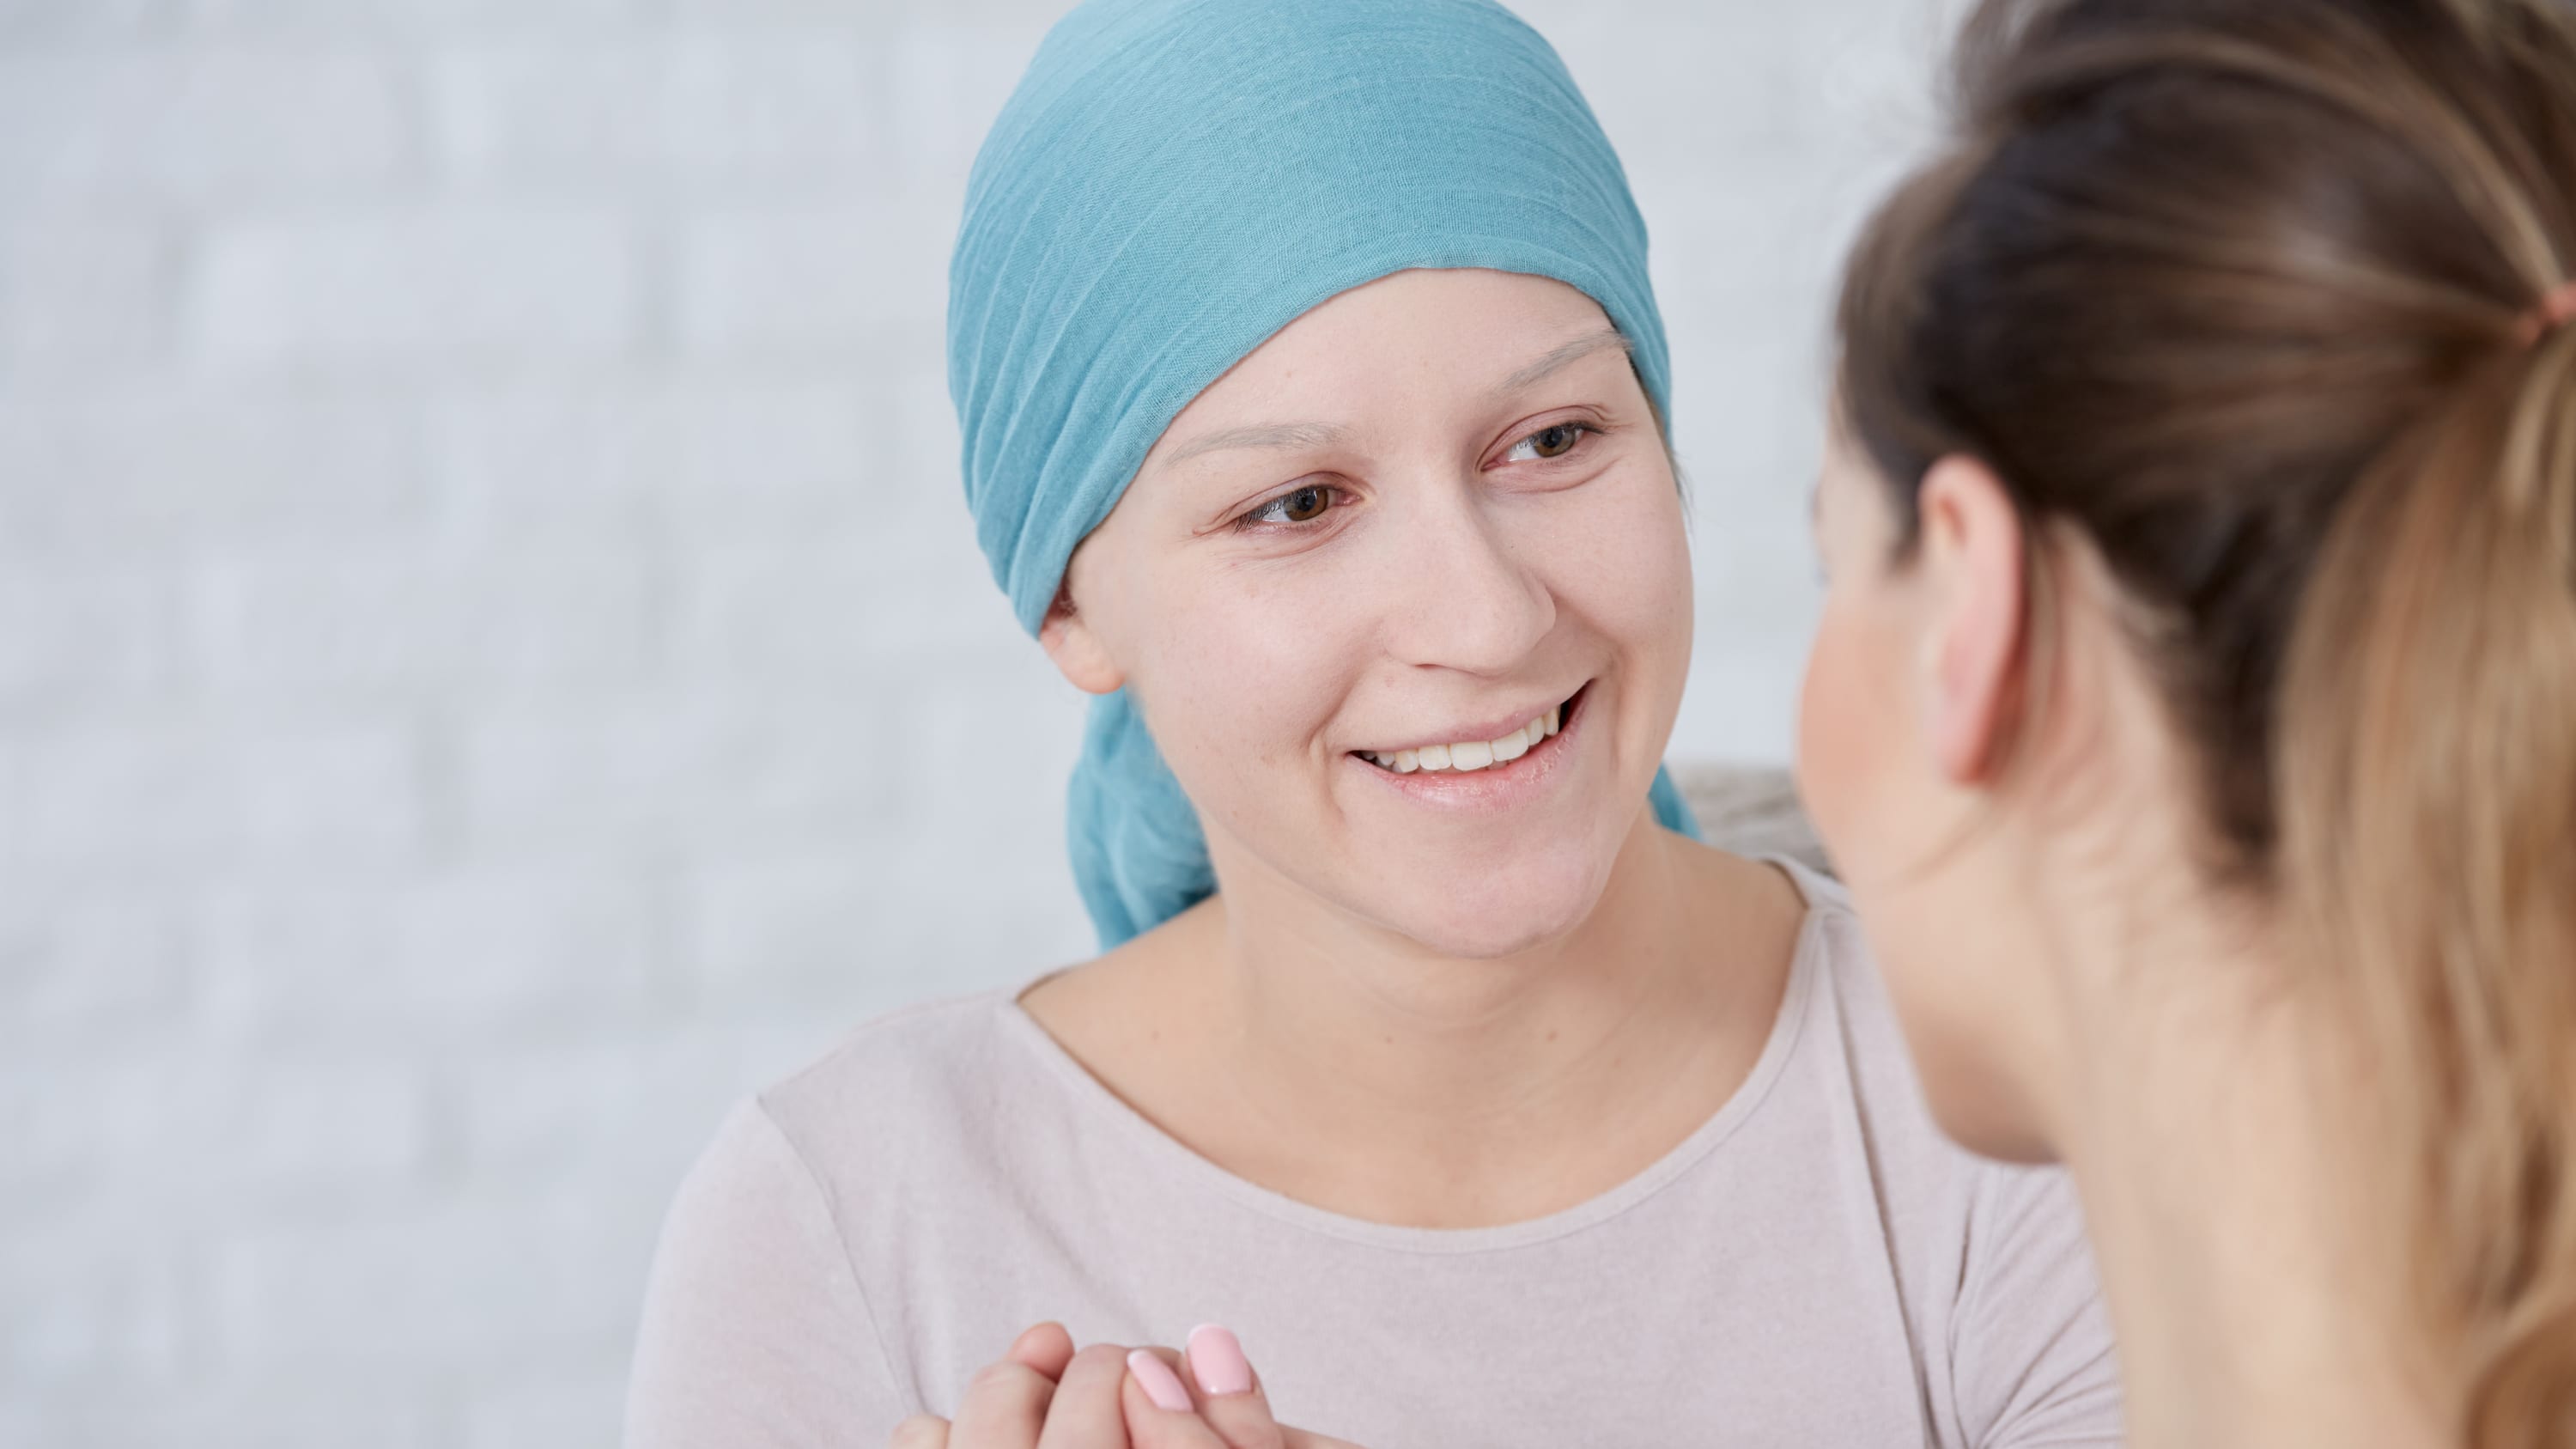 A woman in a head wrap smiles as she converses with a woman with a pony tail.